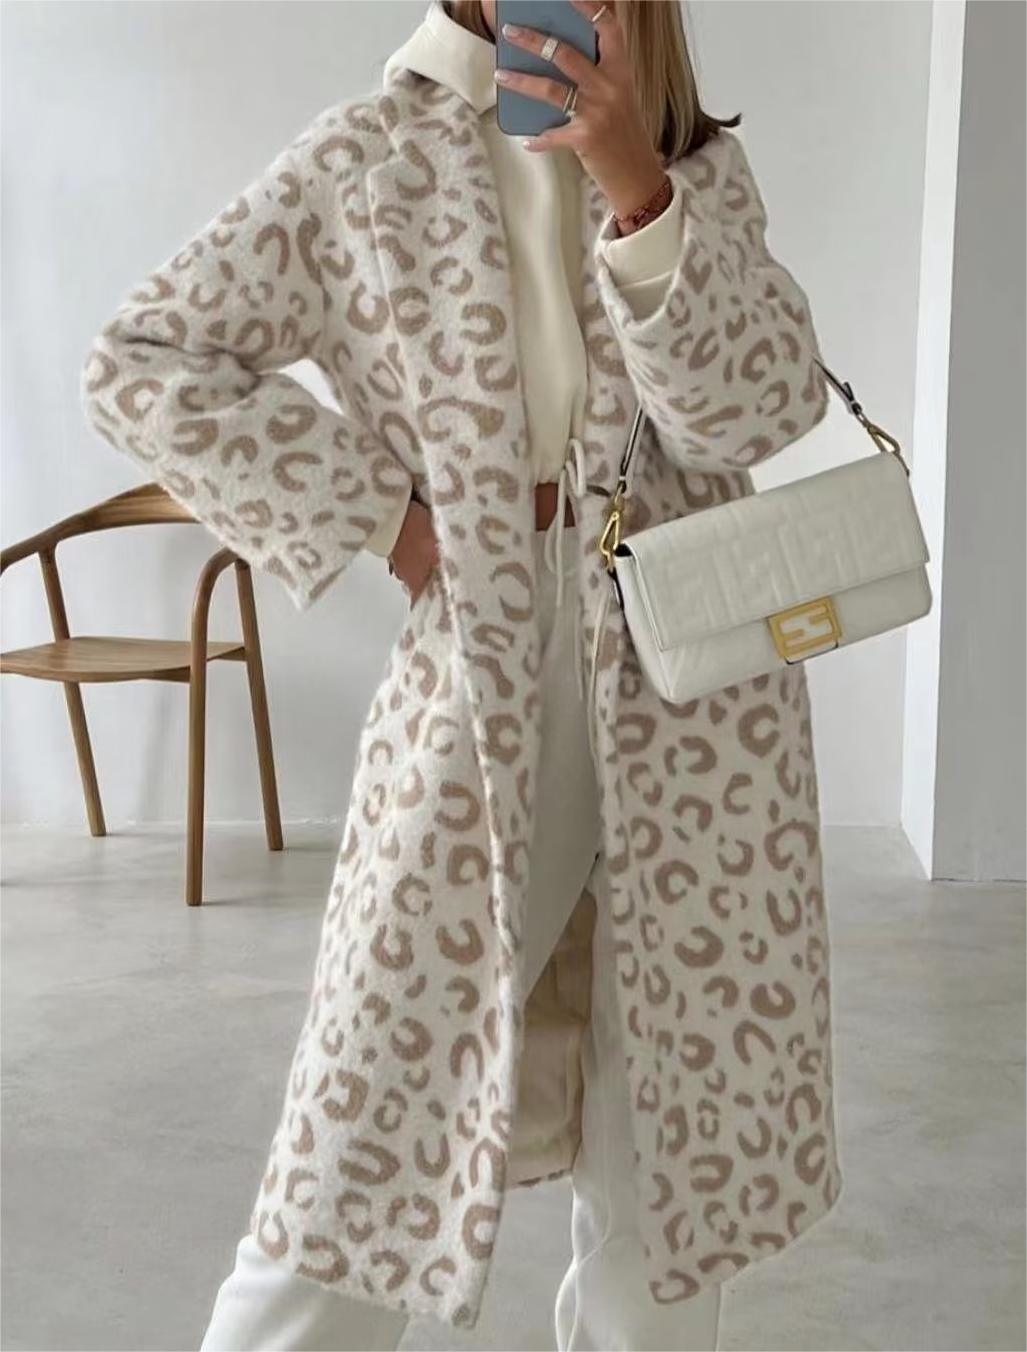 Fluffy Leopard Wool Coat - Perfect for Adding Some Wild to Your Style - ForVanity coat, jackets & coats, women's clothing, wool Coat